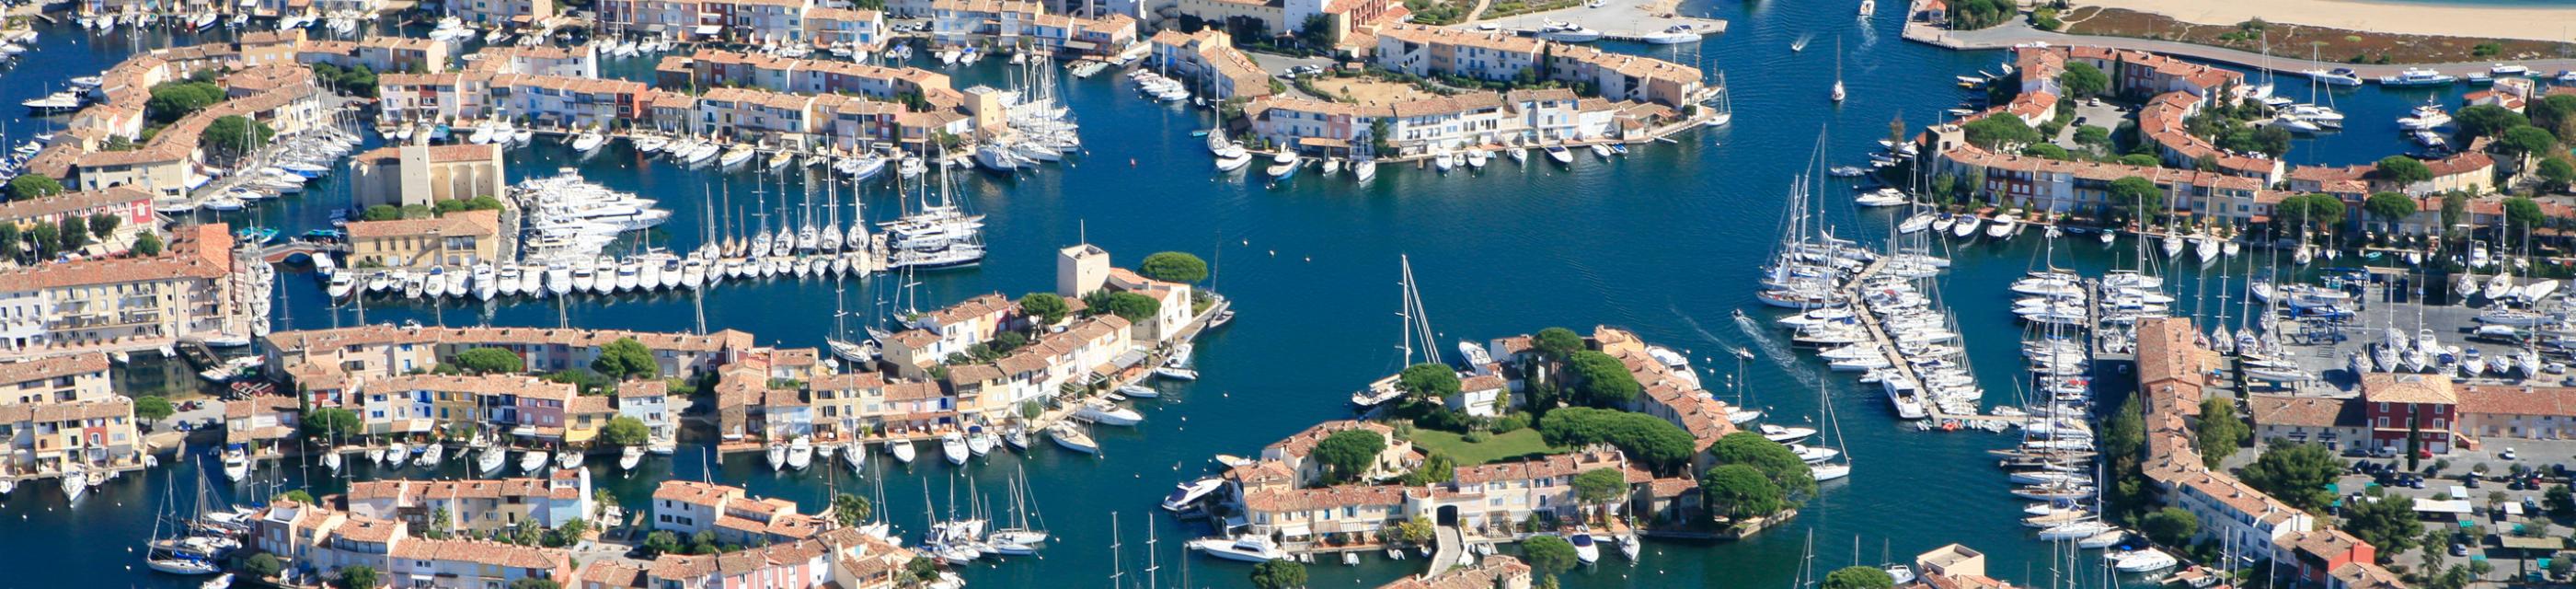 Port Grimaud : a unique real estate in the heart of the Riviera 